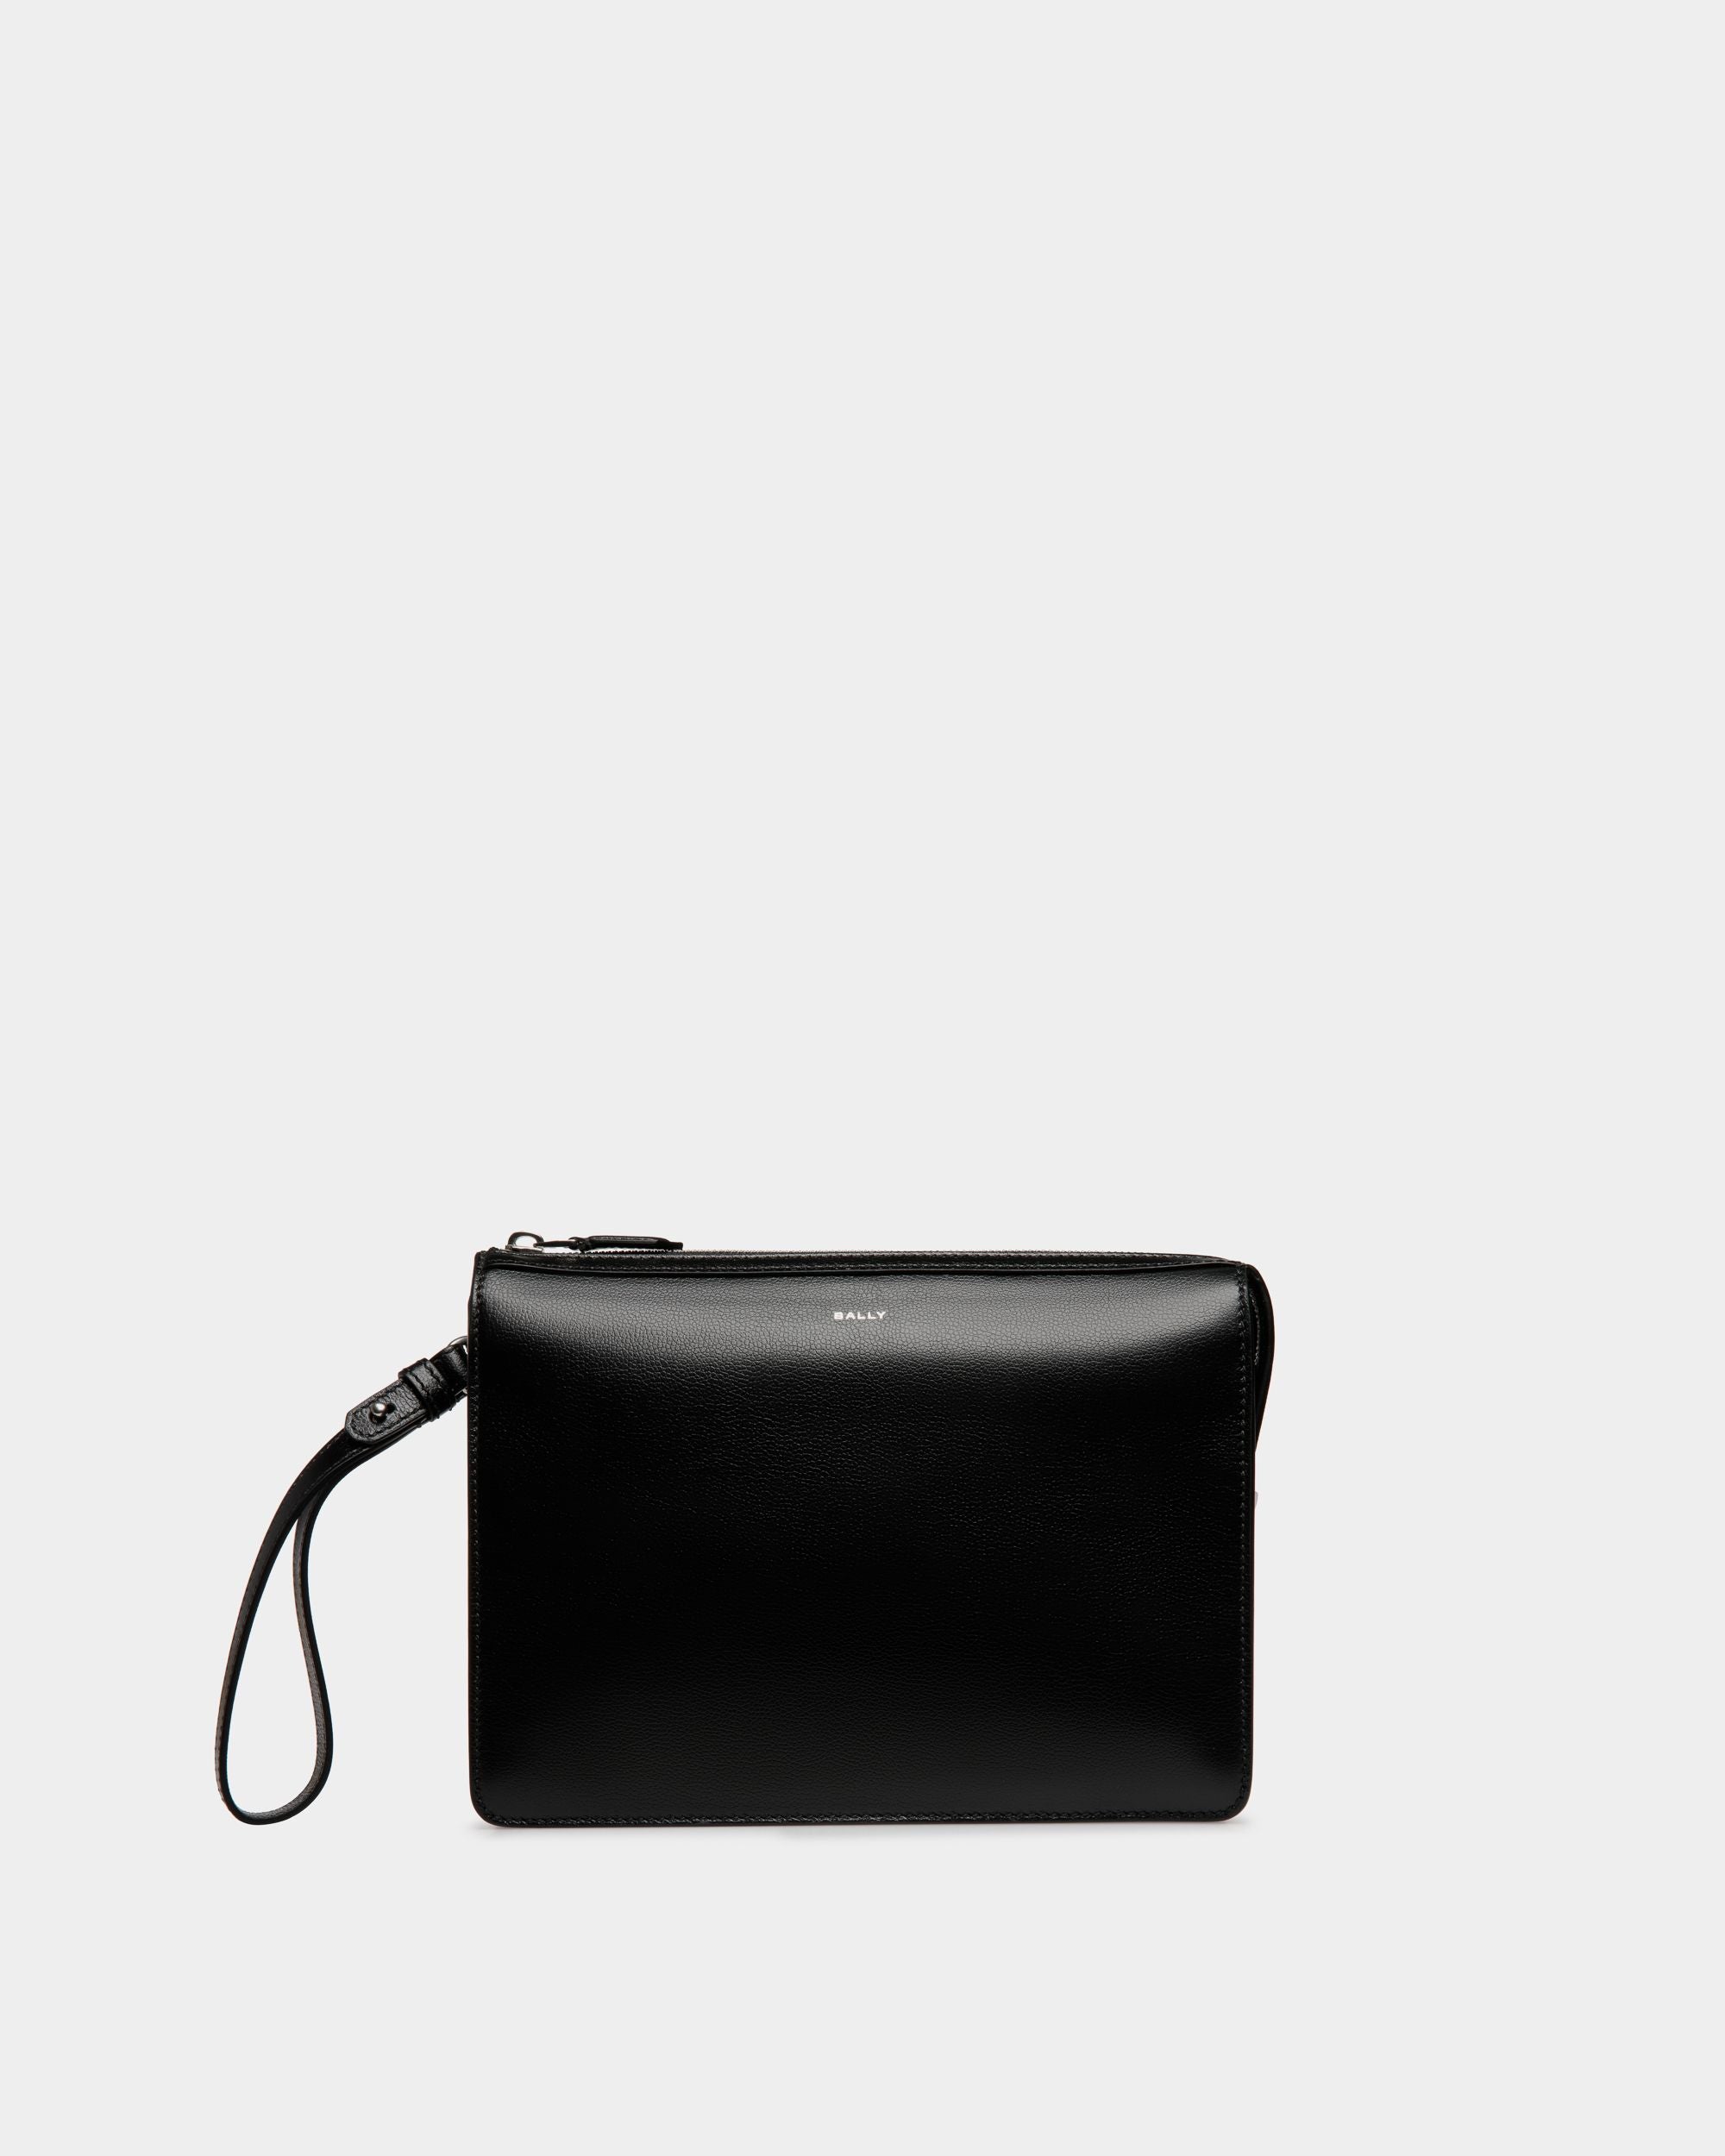 PM | Men's Clutches And Portfolios | Black Leather | Bally | Still Life Front